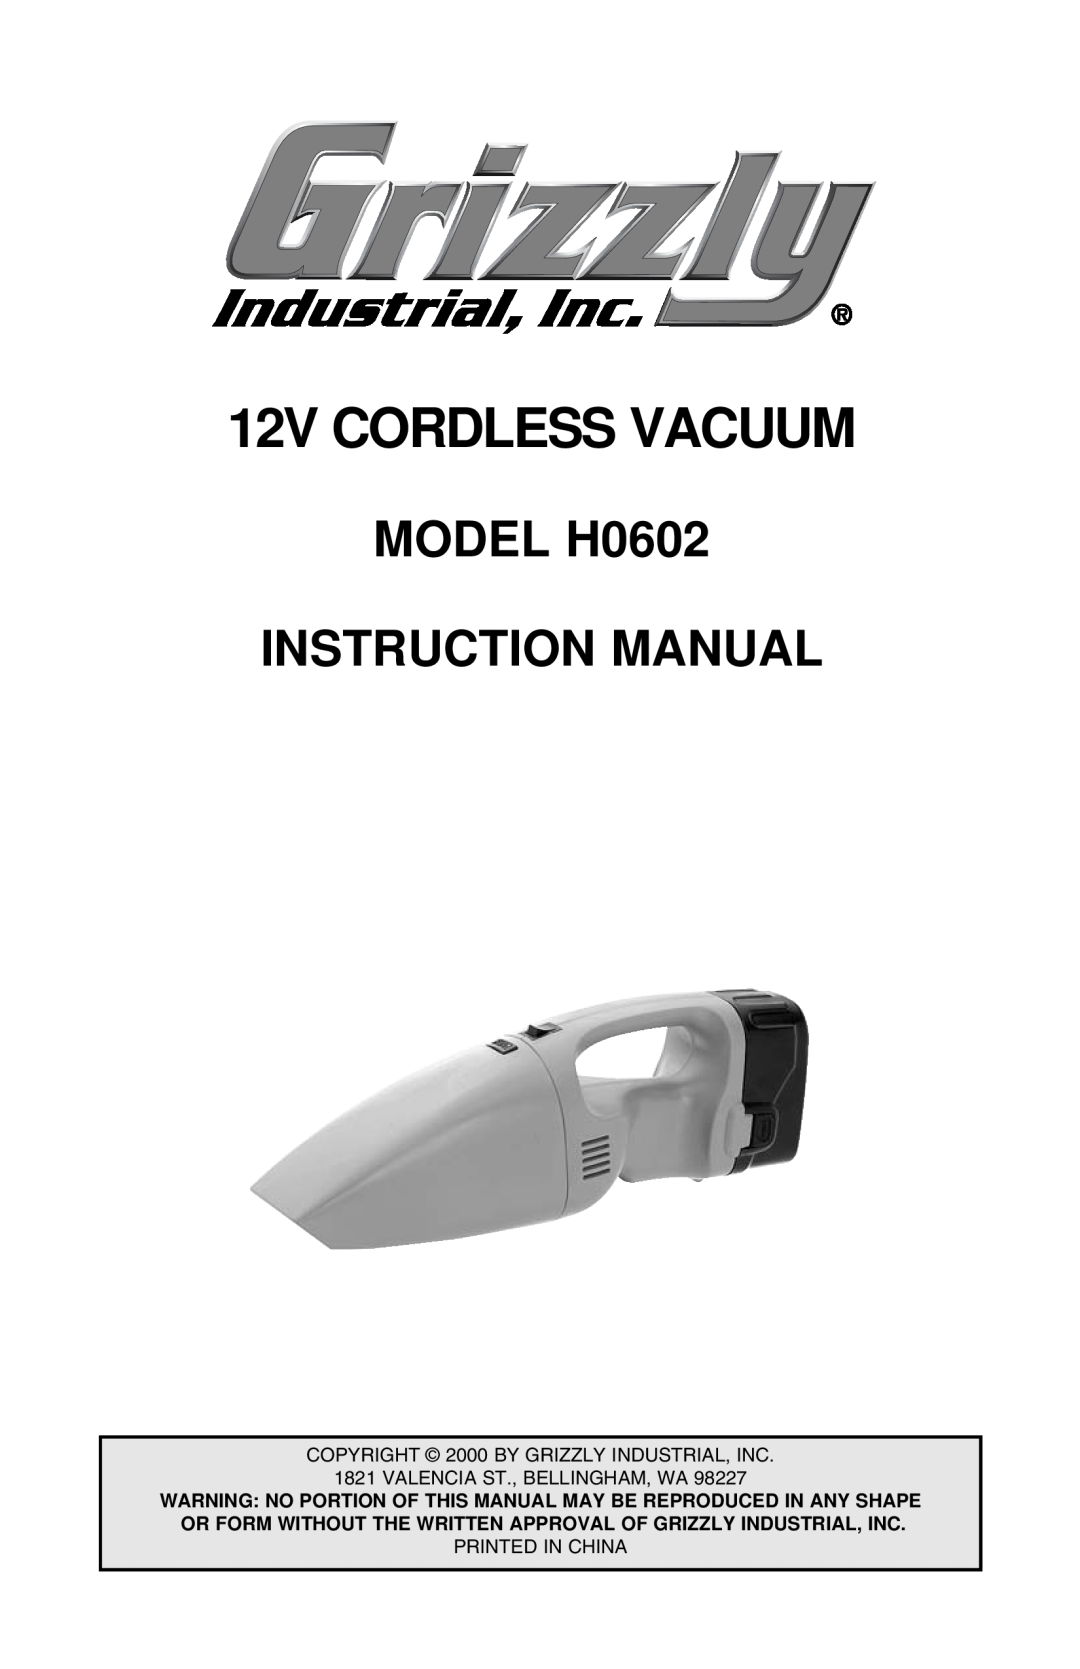 Grizzly H0602 instruction manual 12V CORDLESS VACUUM 